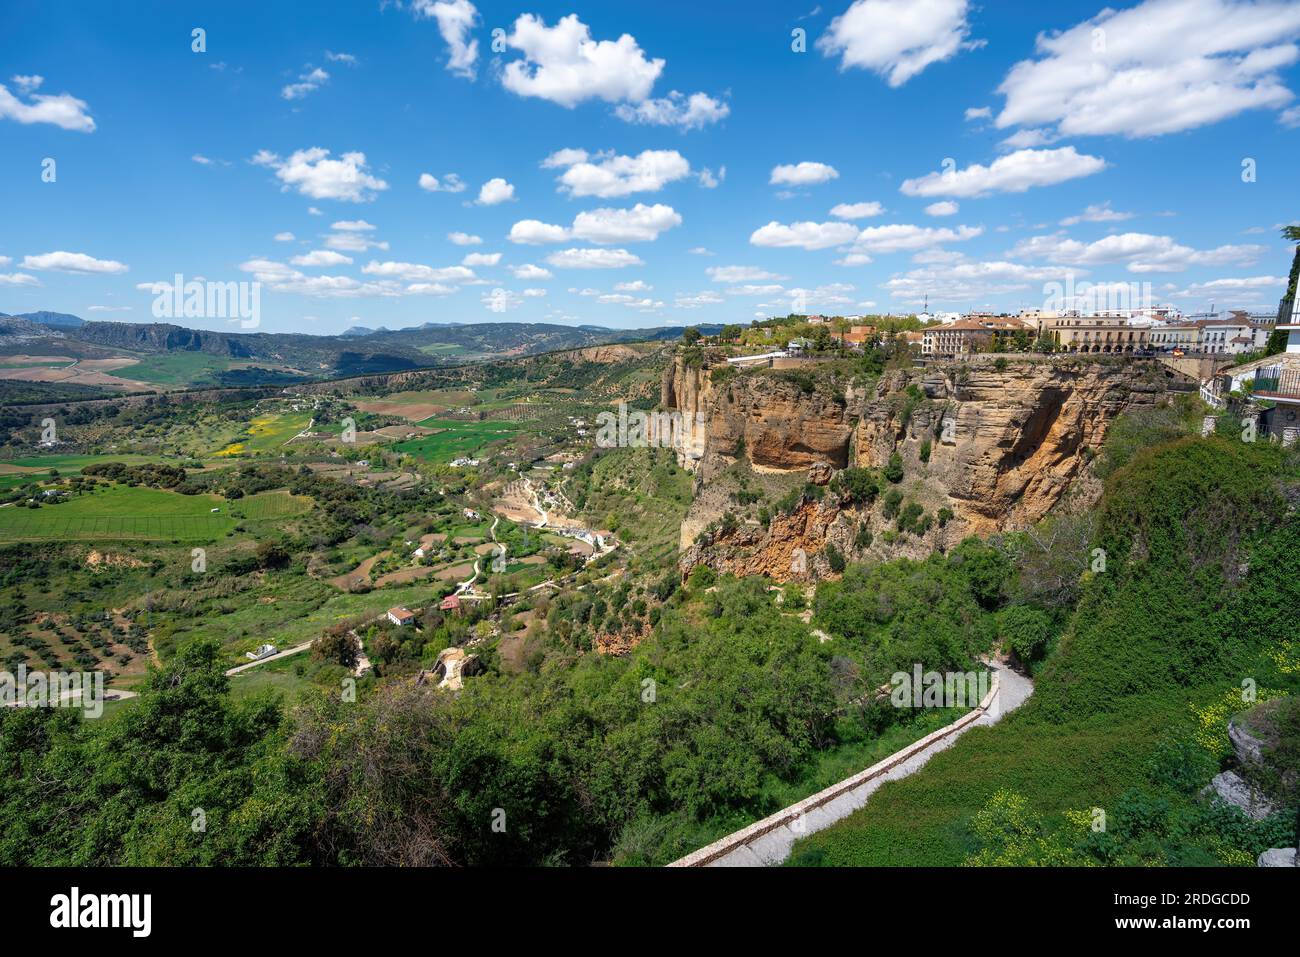 View of Ronda Cliff and Valley - Ronda, Andalusia, Spain Stock Photo